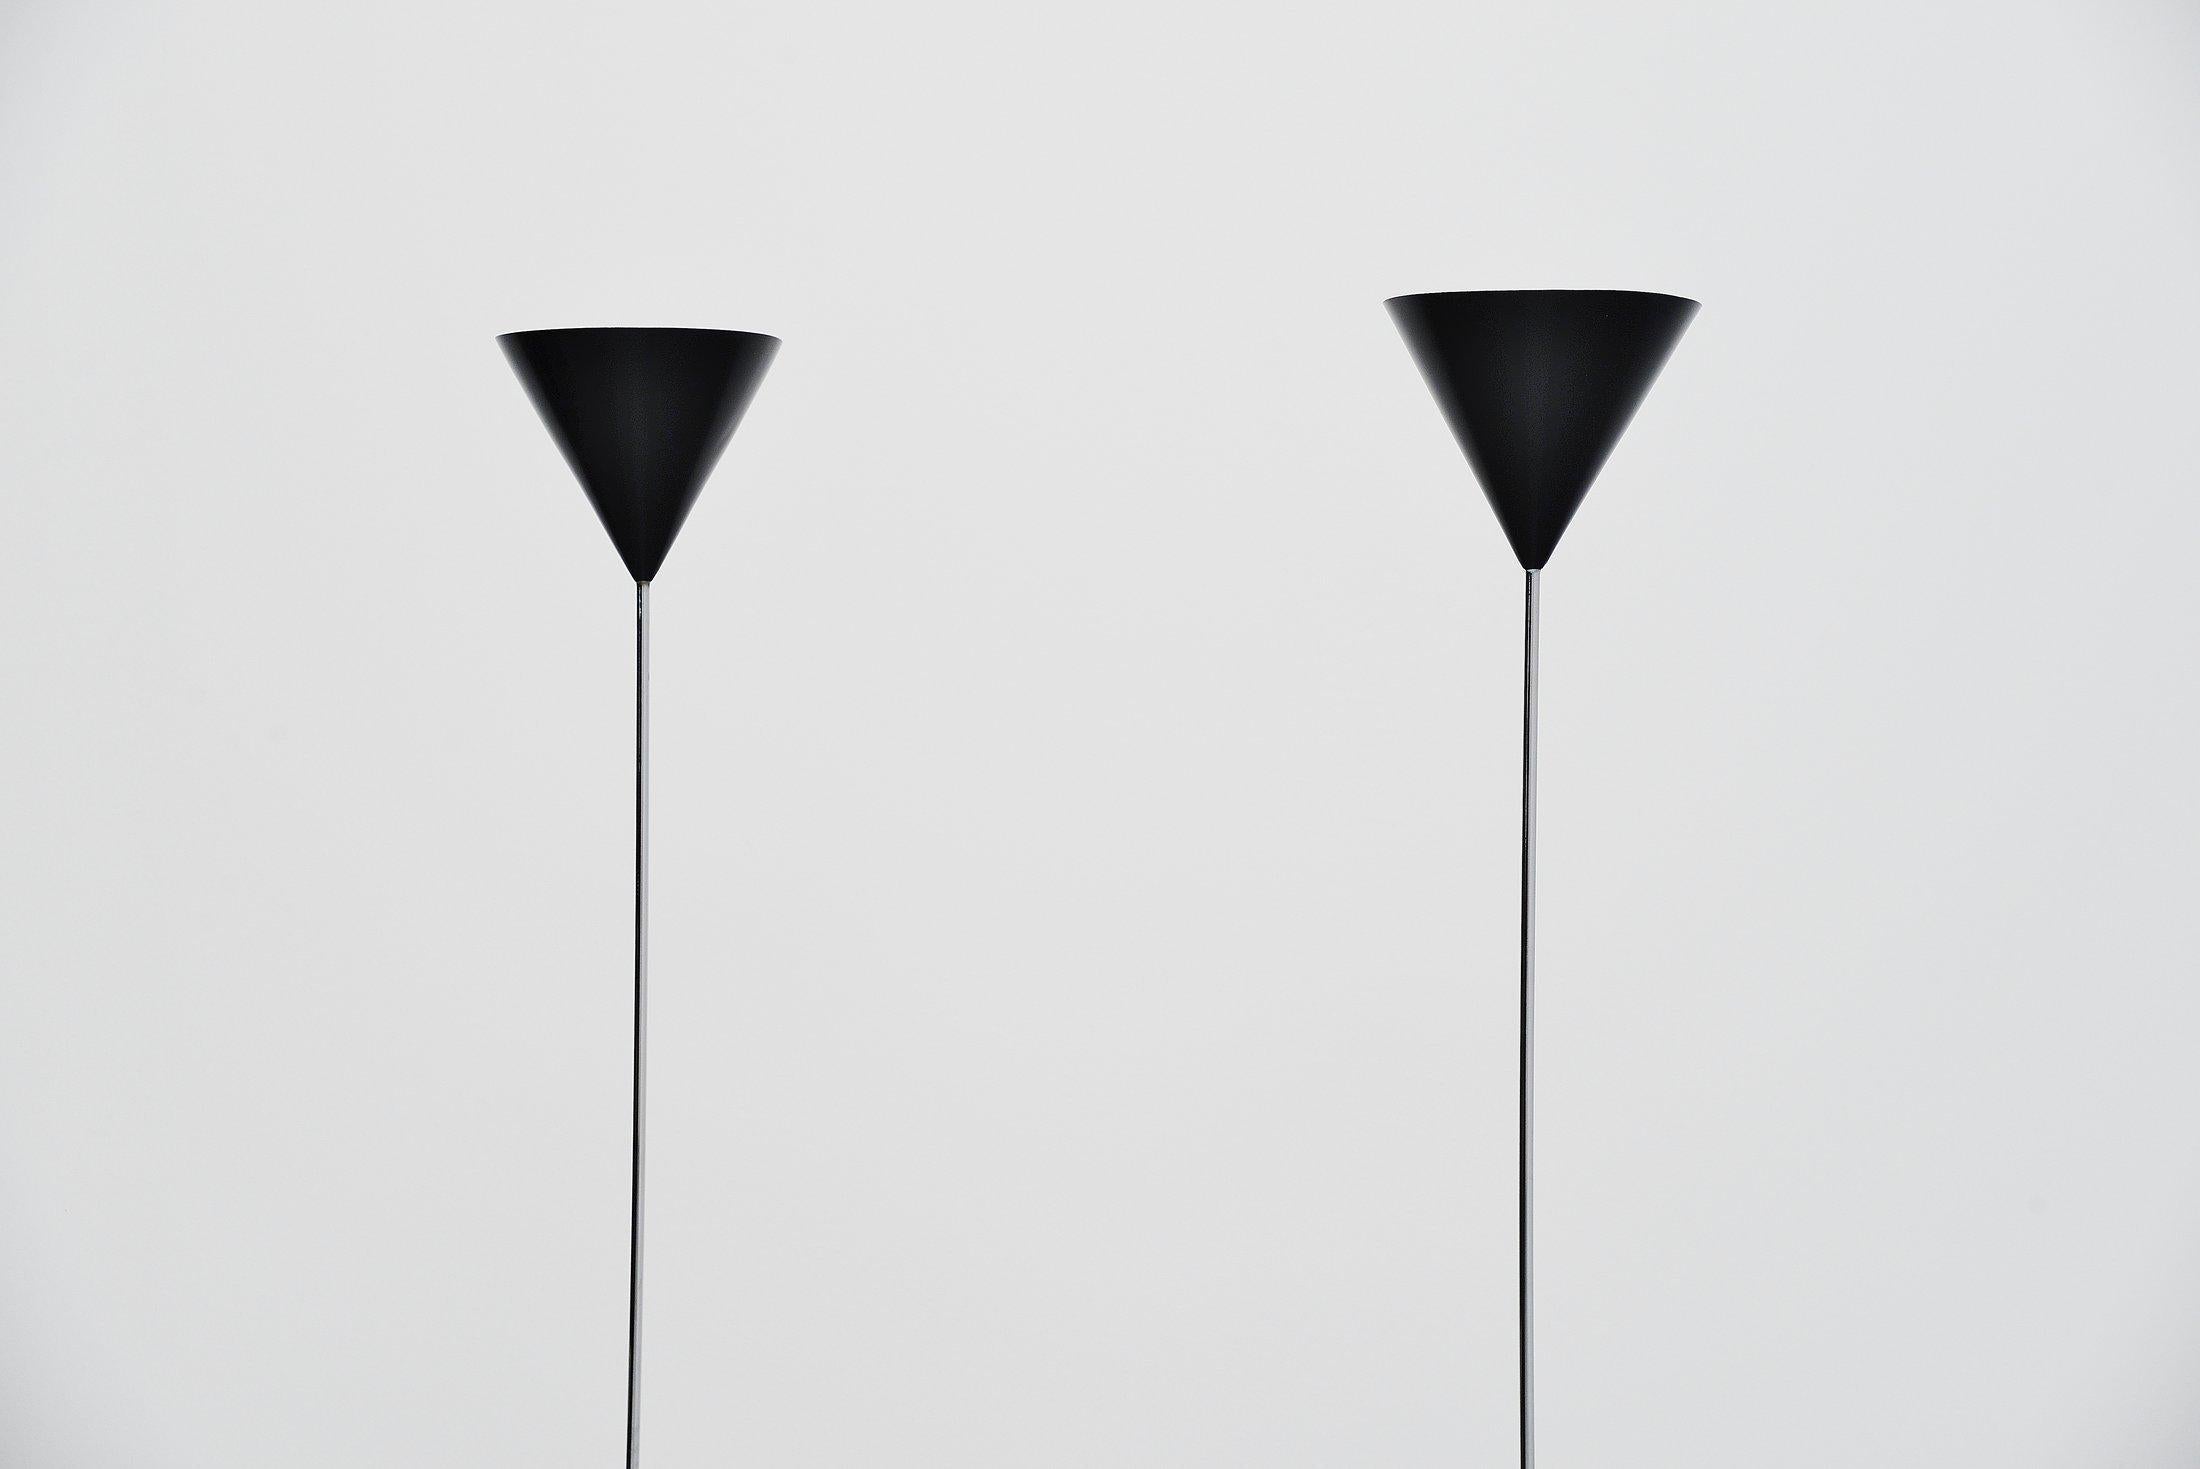 Very nice pair of model LTE5 Imbuto floor lamps designed by Luigi Caccia Dominioni and manufactured by Azucena, Italy, 1954. This is for a nice pair of floor lamps with black painted base and shade and chrome stems. The lamps are in very good